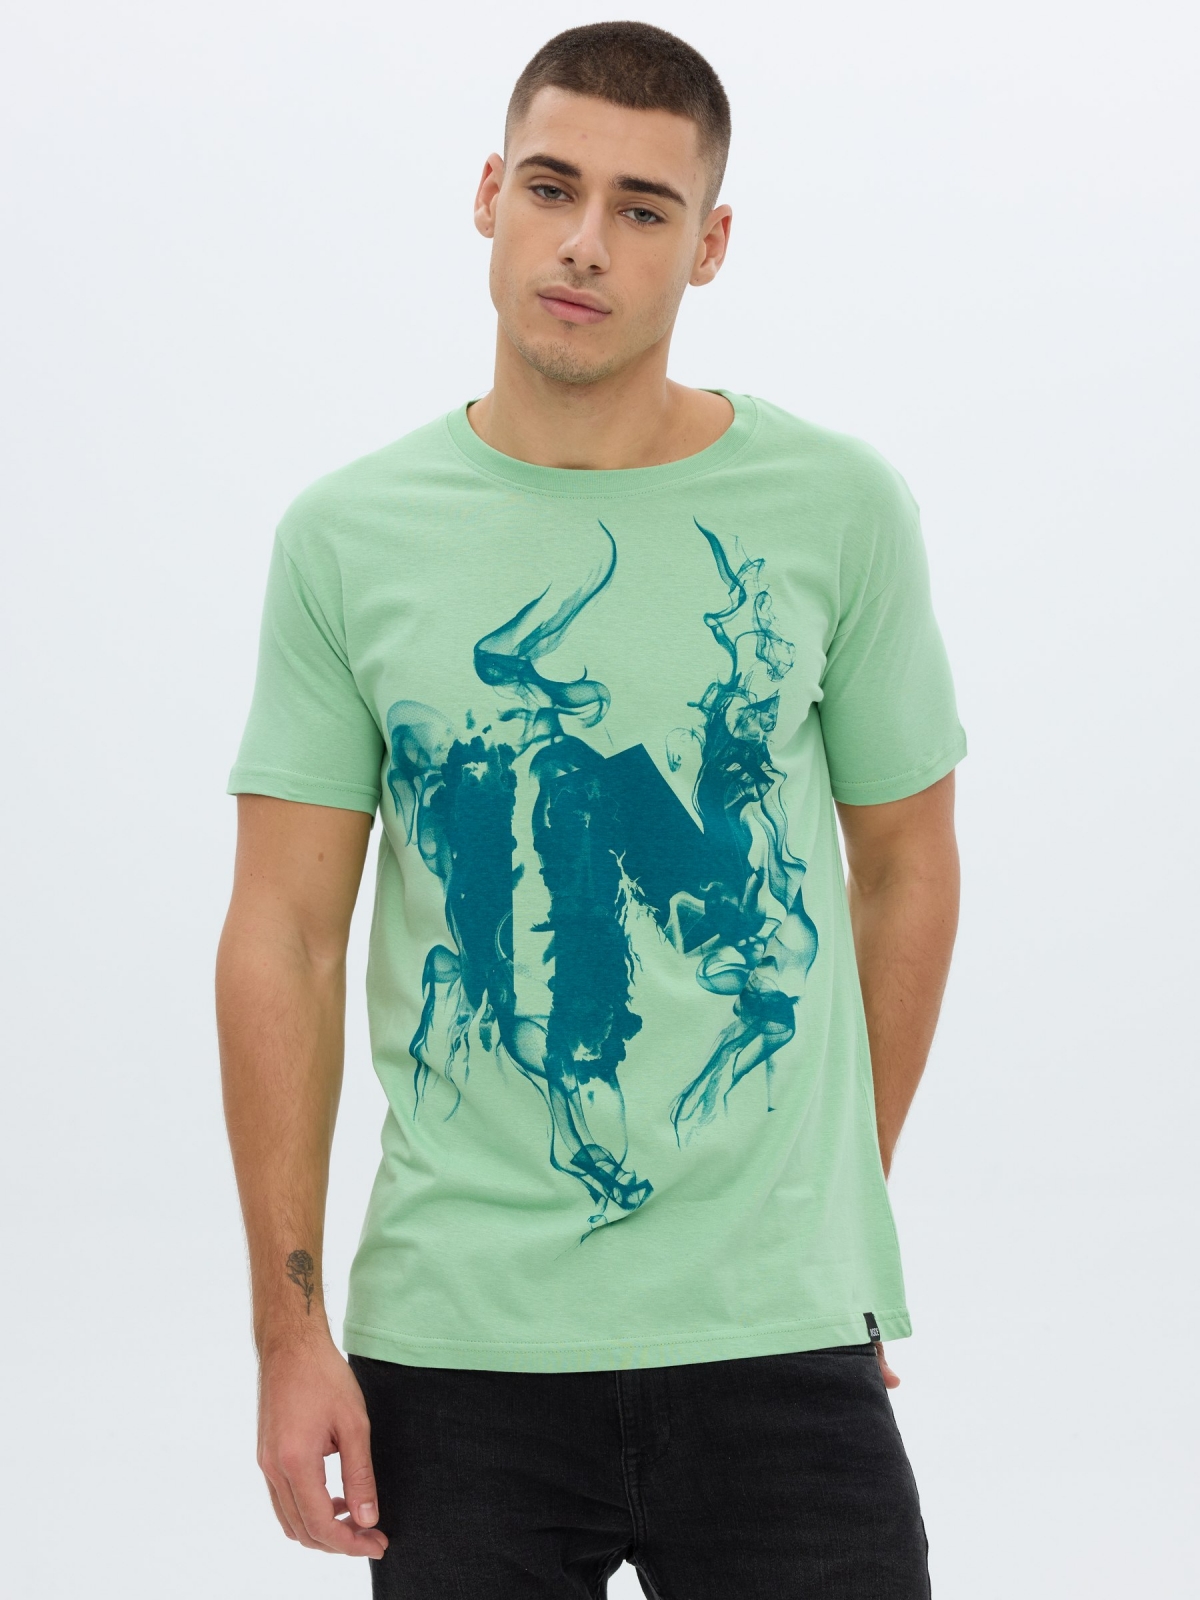 INSIDE printed T-shirt light green middle front view